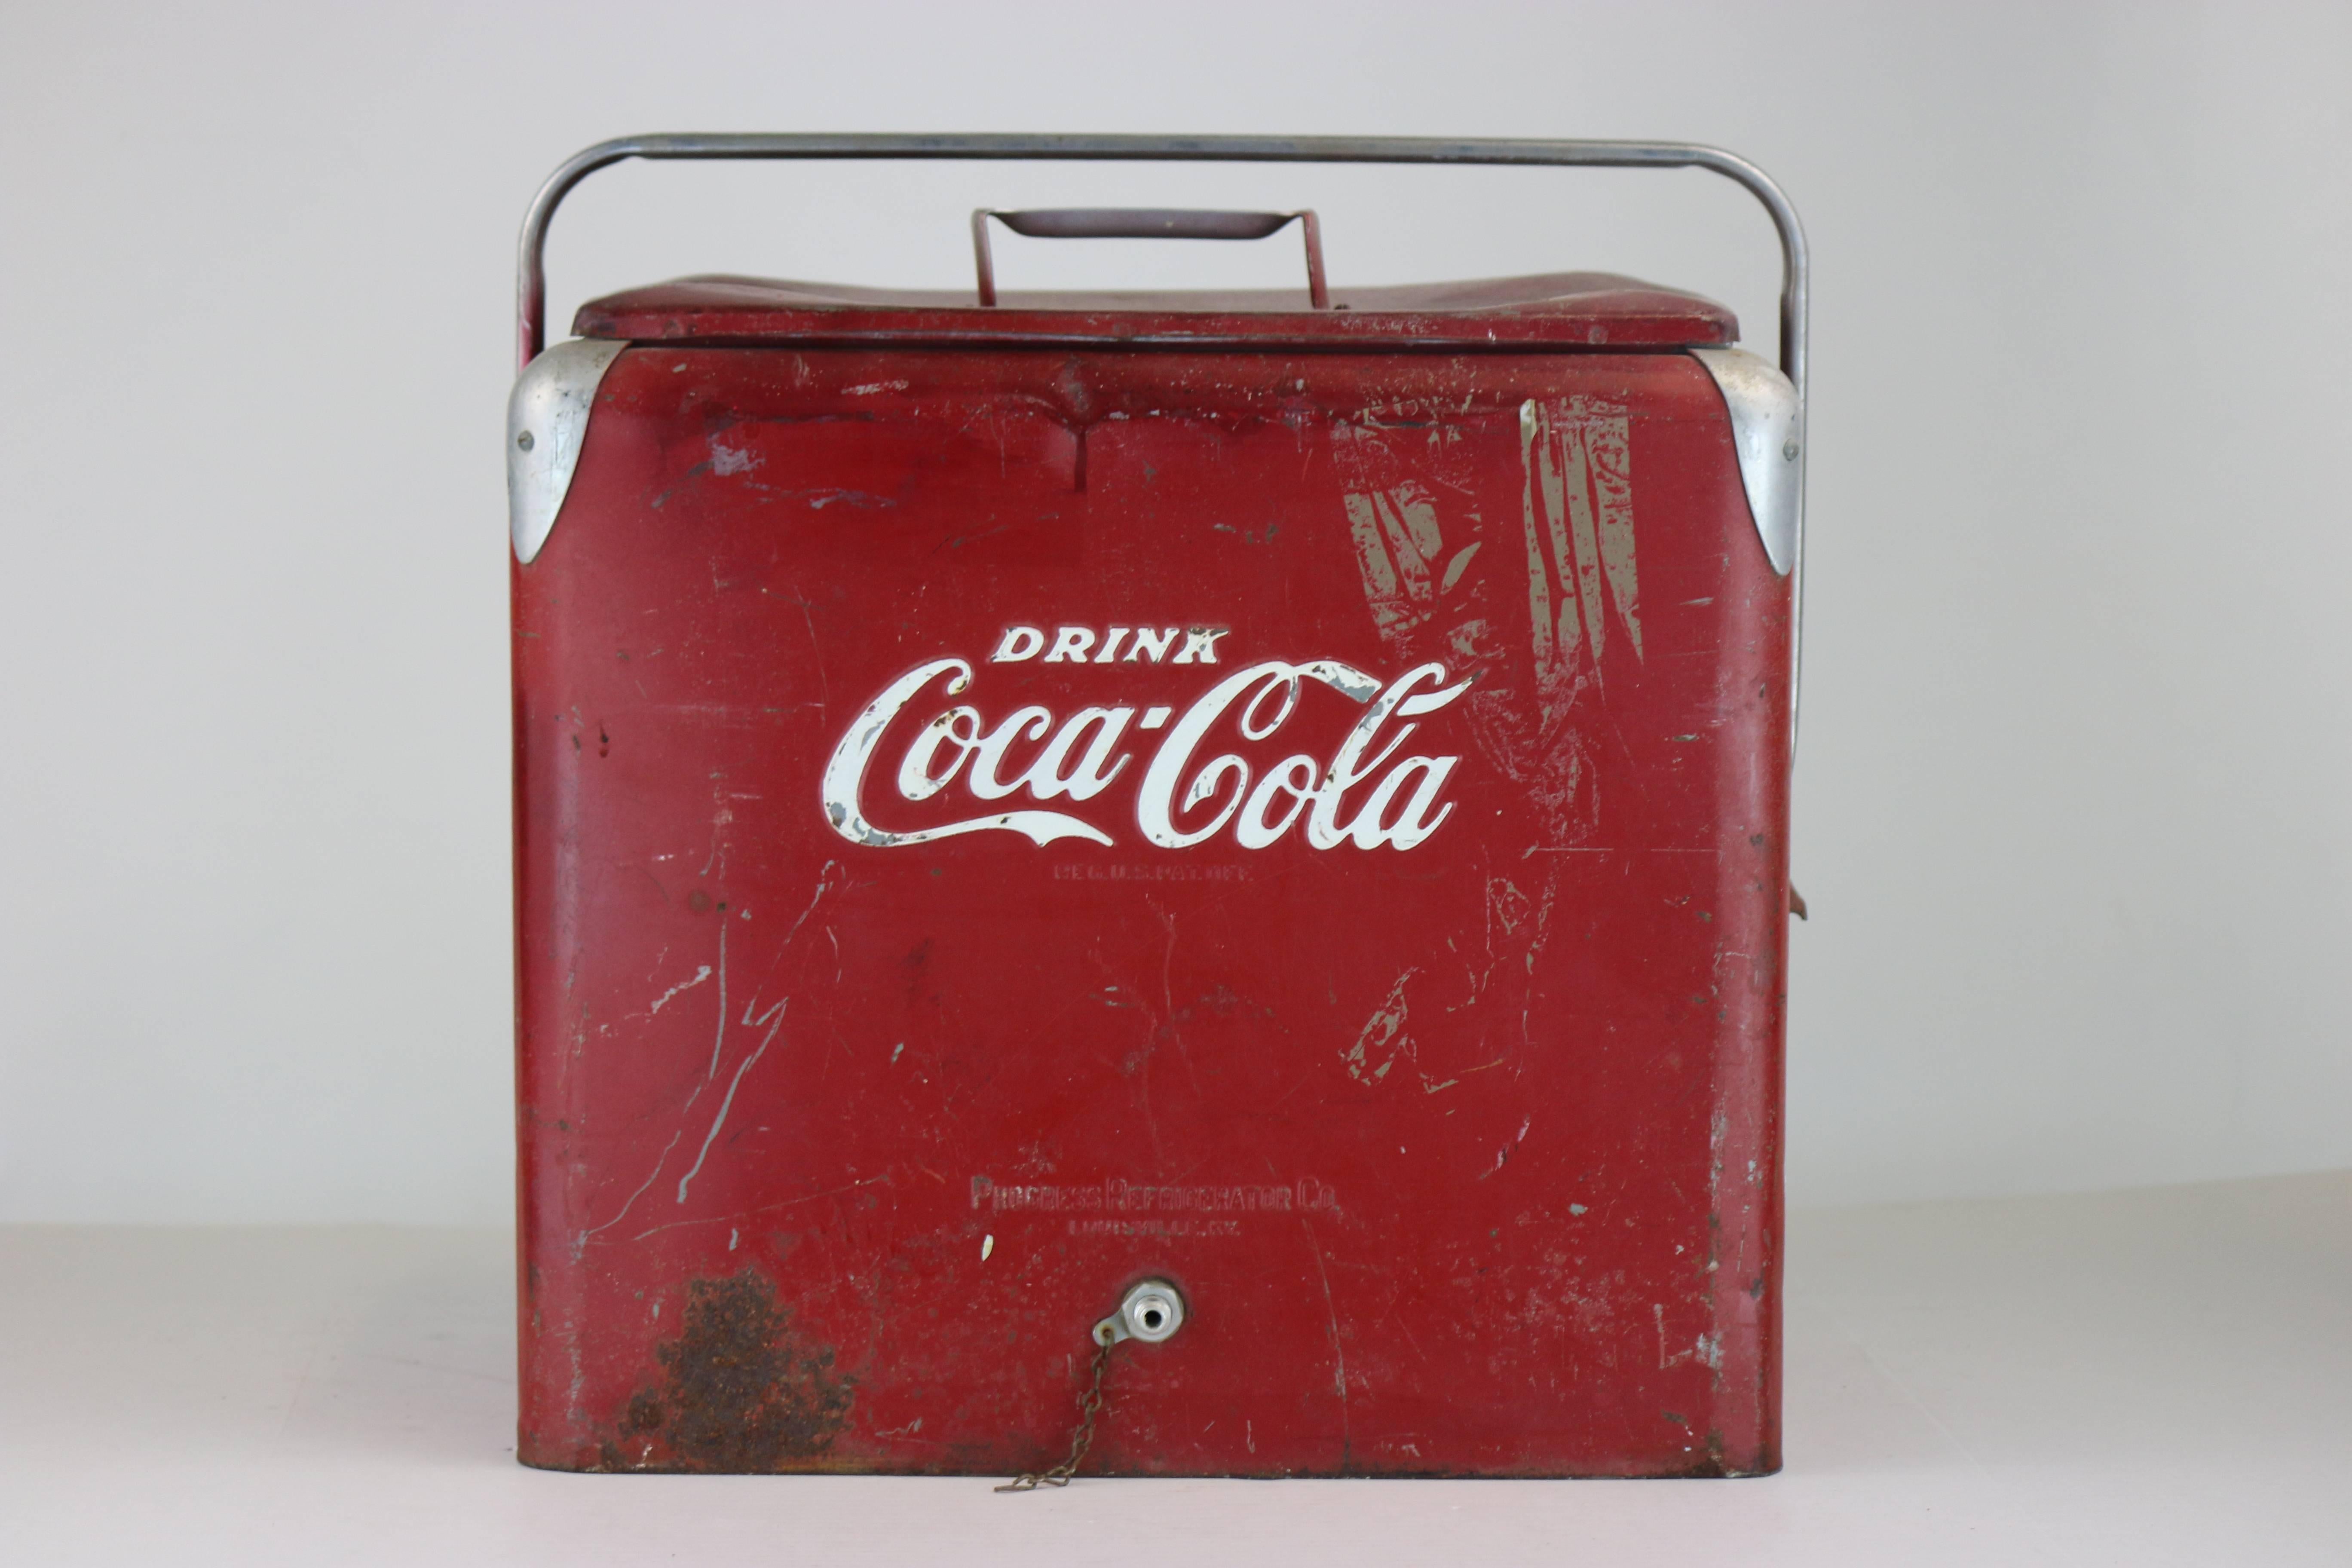 1940s aluminum vintage and Classic Coca-Cola ice chest by progress refrigerator Co. Louisville KY. Good interior condition-top a bit misshapen-aluminum handle.
Looks cool and retro Mid-Century as is, or can be a perfect candidate for